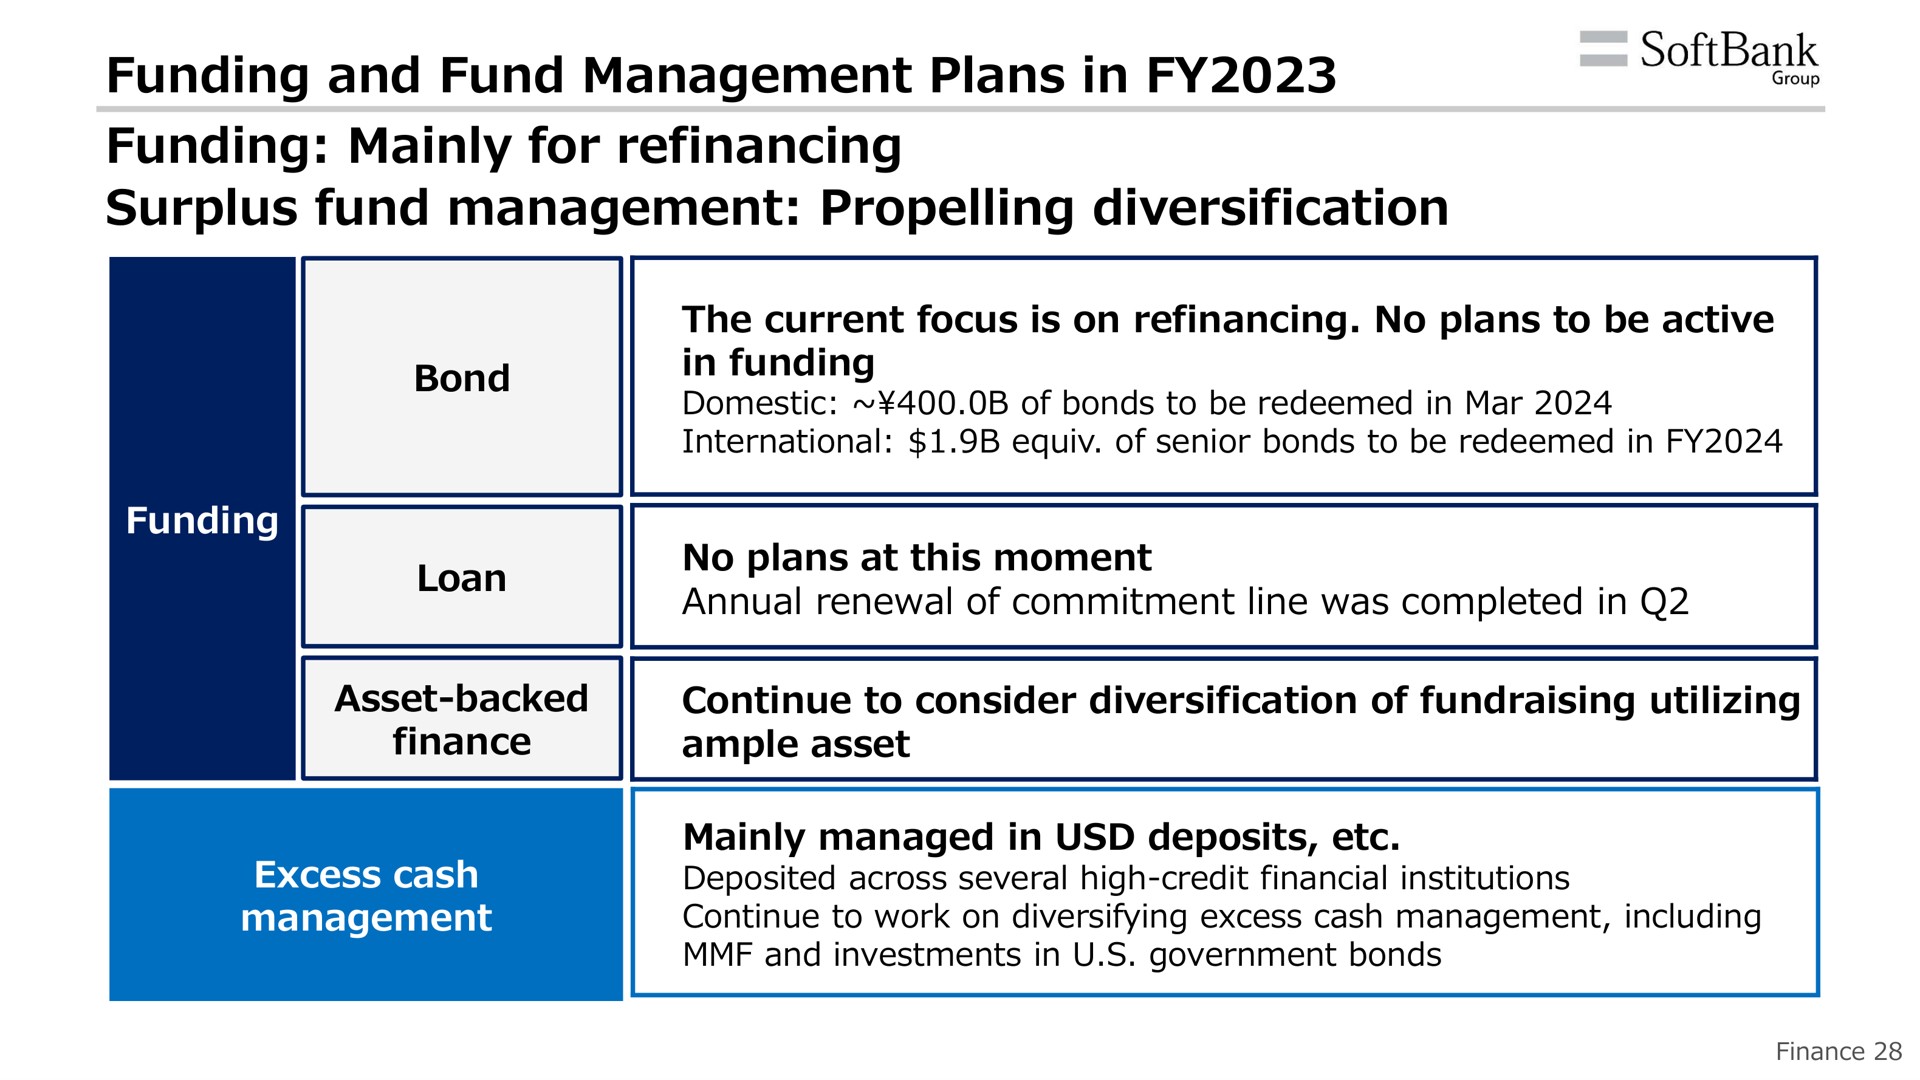 funding and fund management plans in funding mainly for refinancing surplus fund management diversification | SoftBank